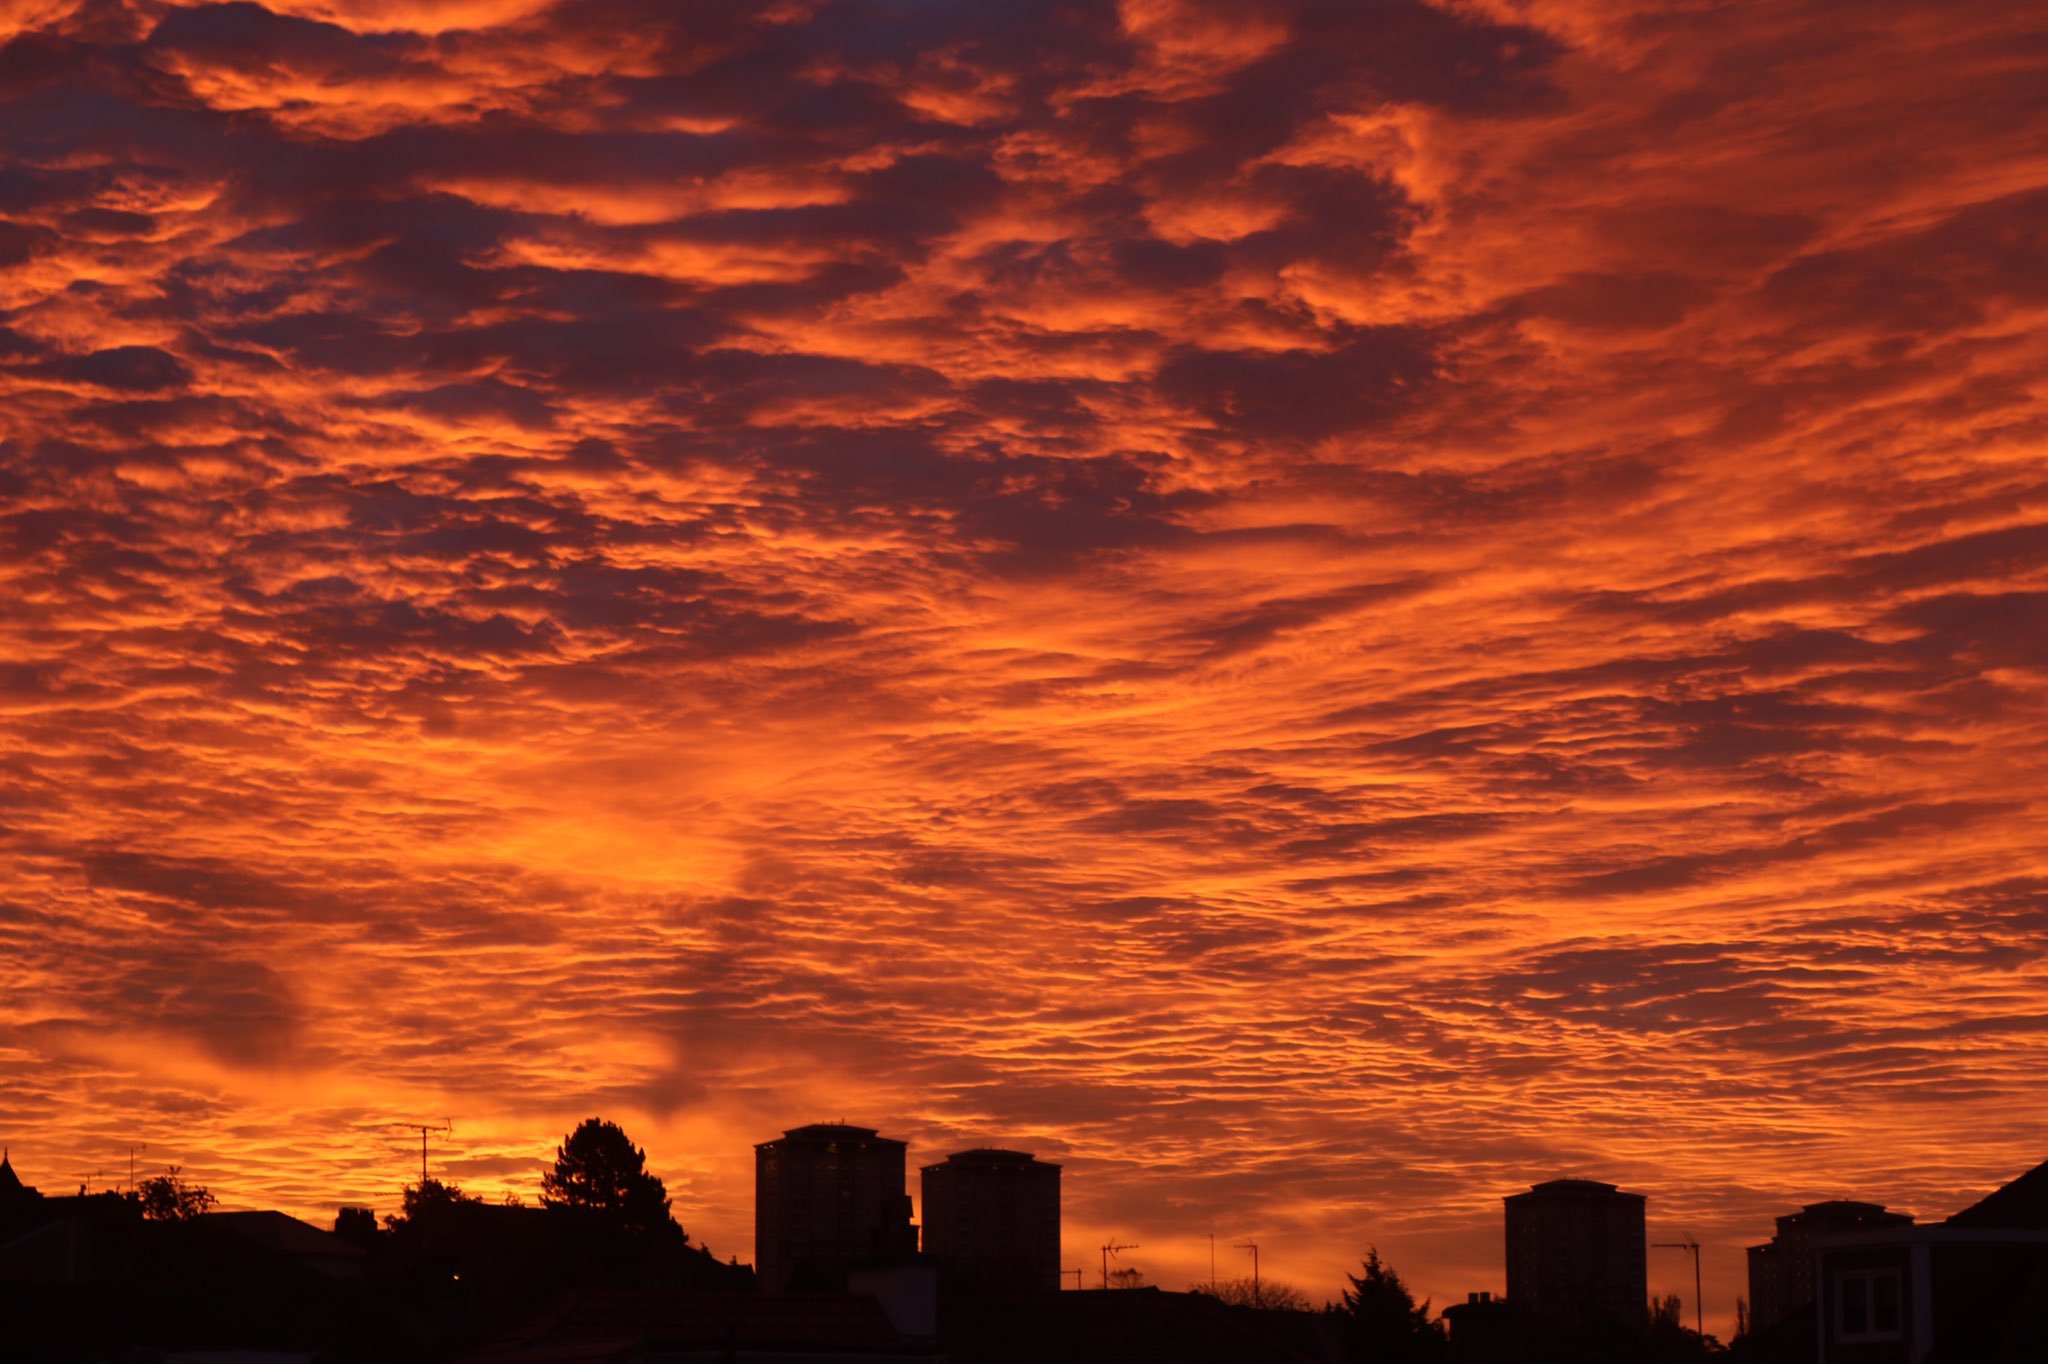 3rd Place Motherwell morning sky by john dyer @wildswimmer67